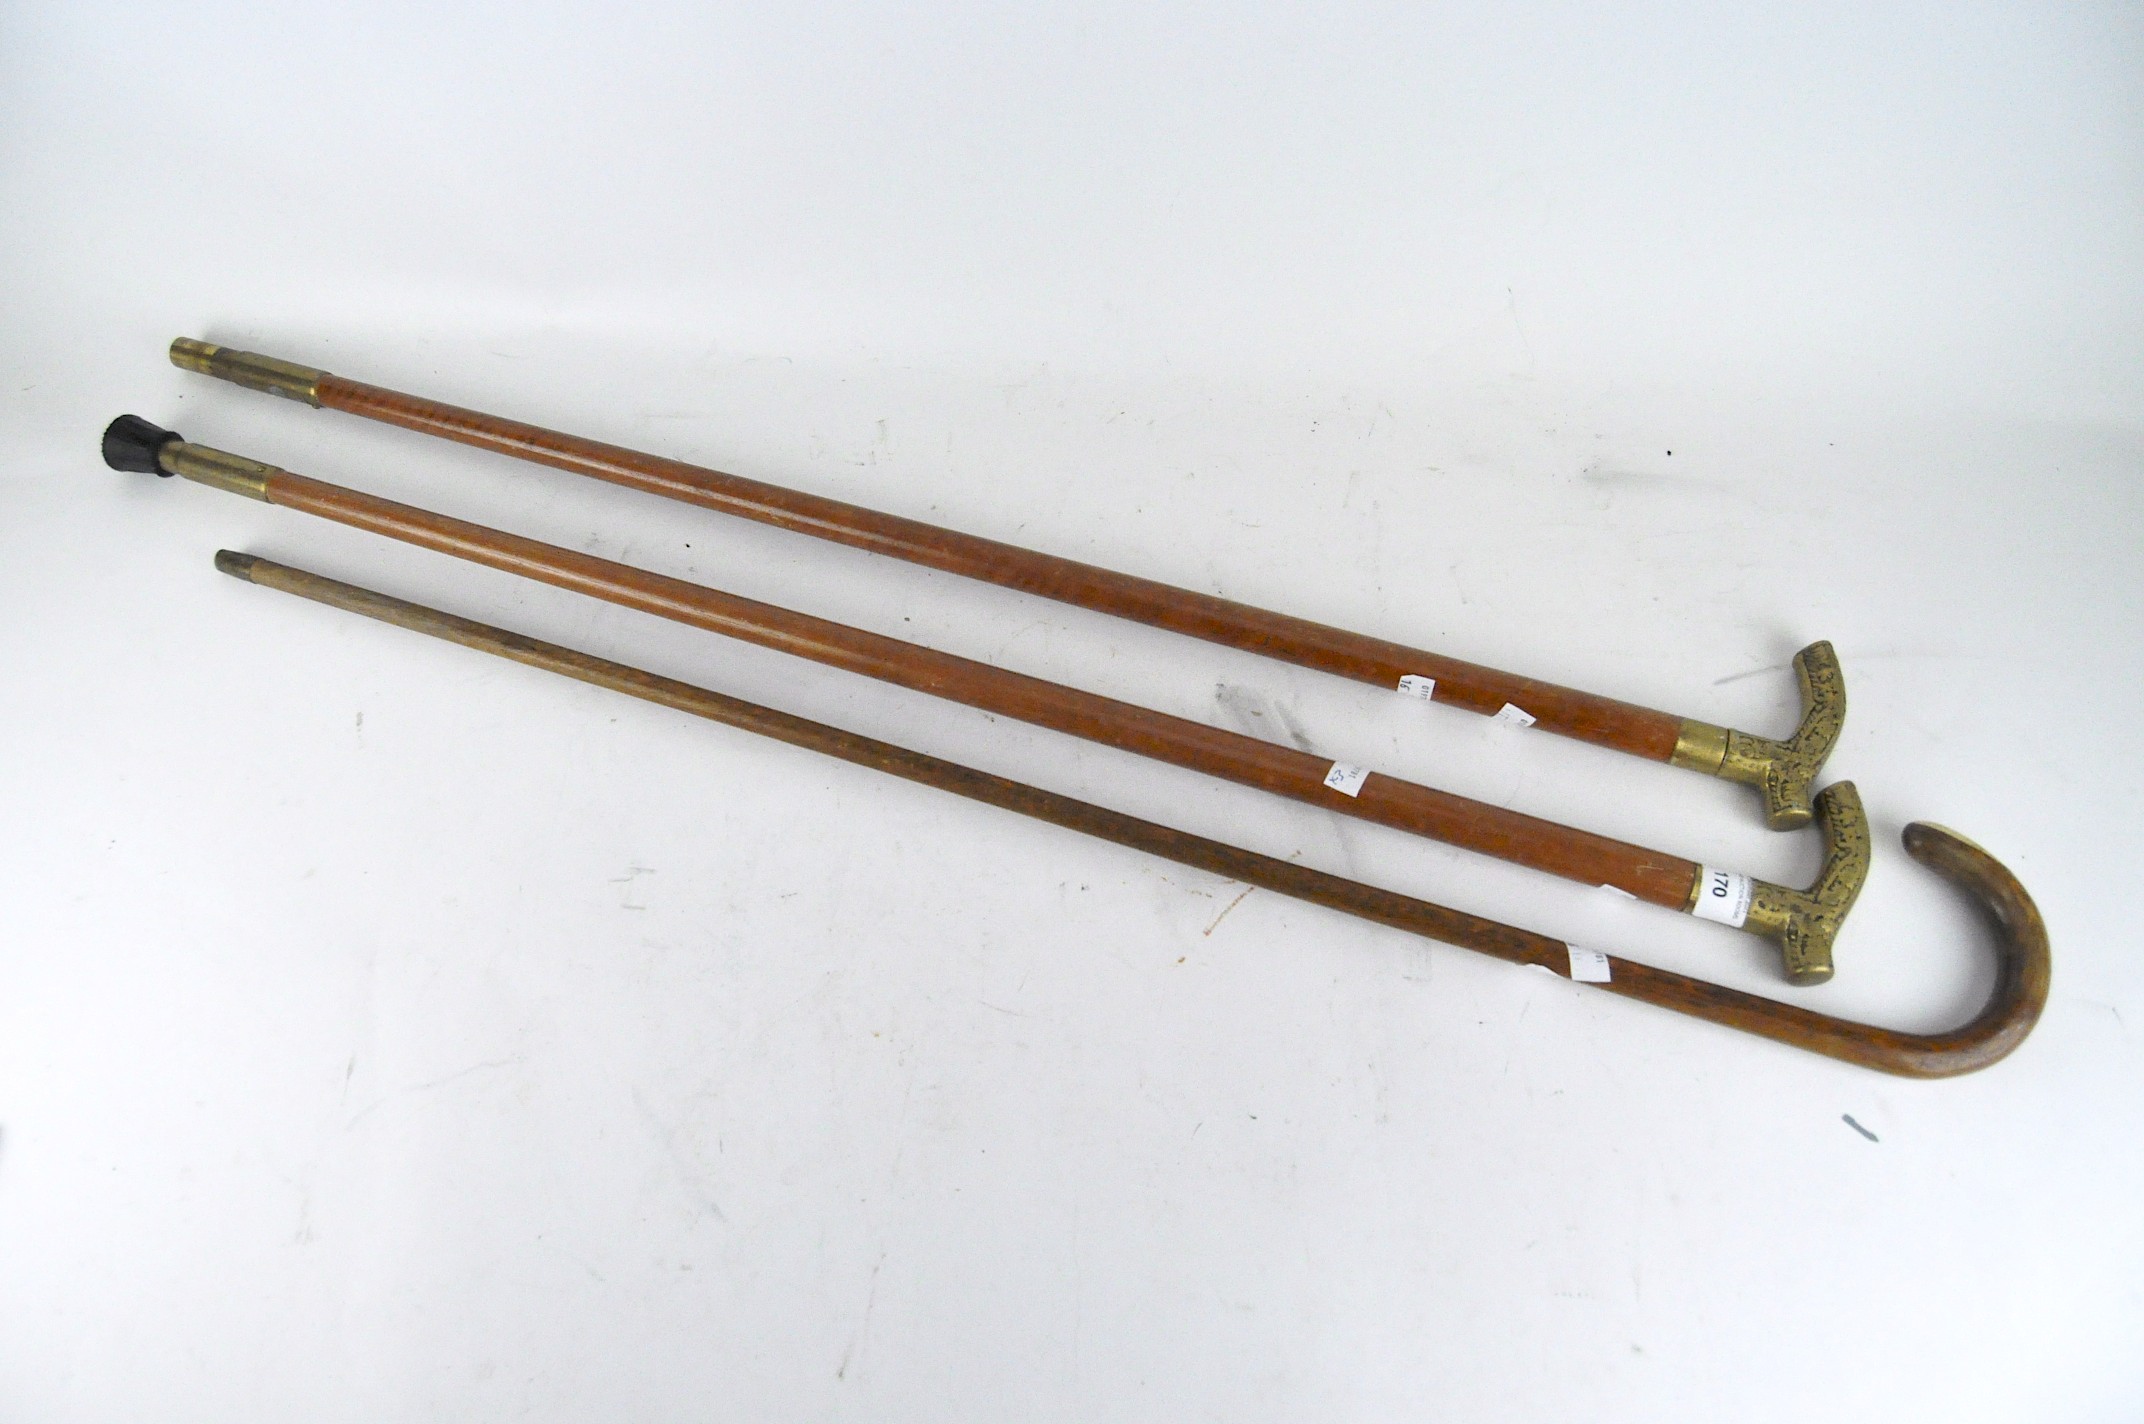 Three walking canes, all wooden sticks, one with a curved handle,